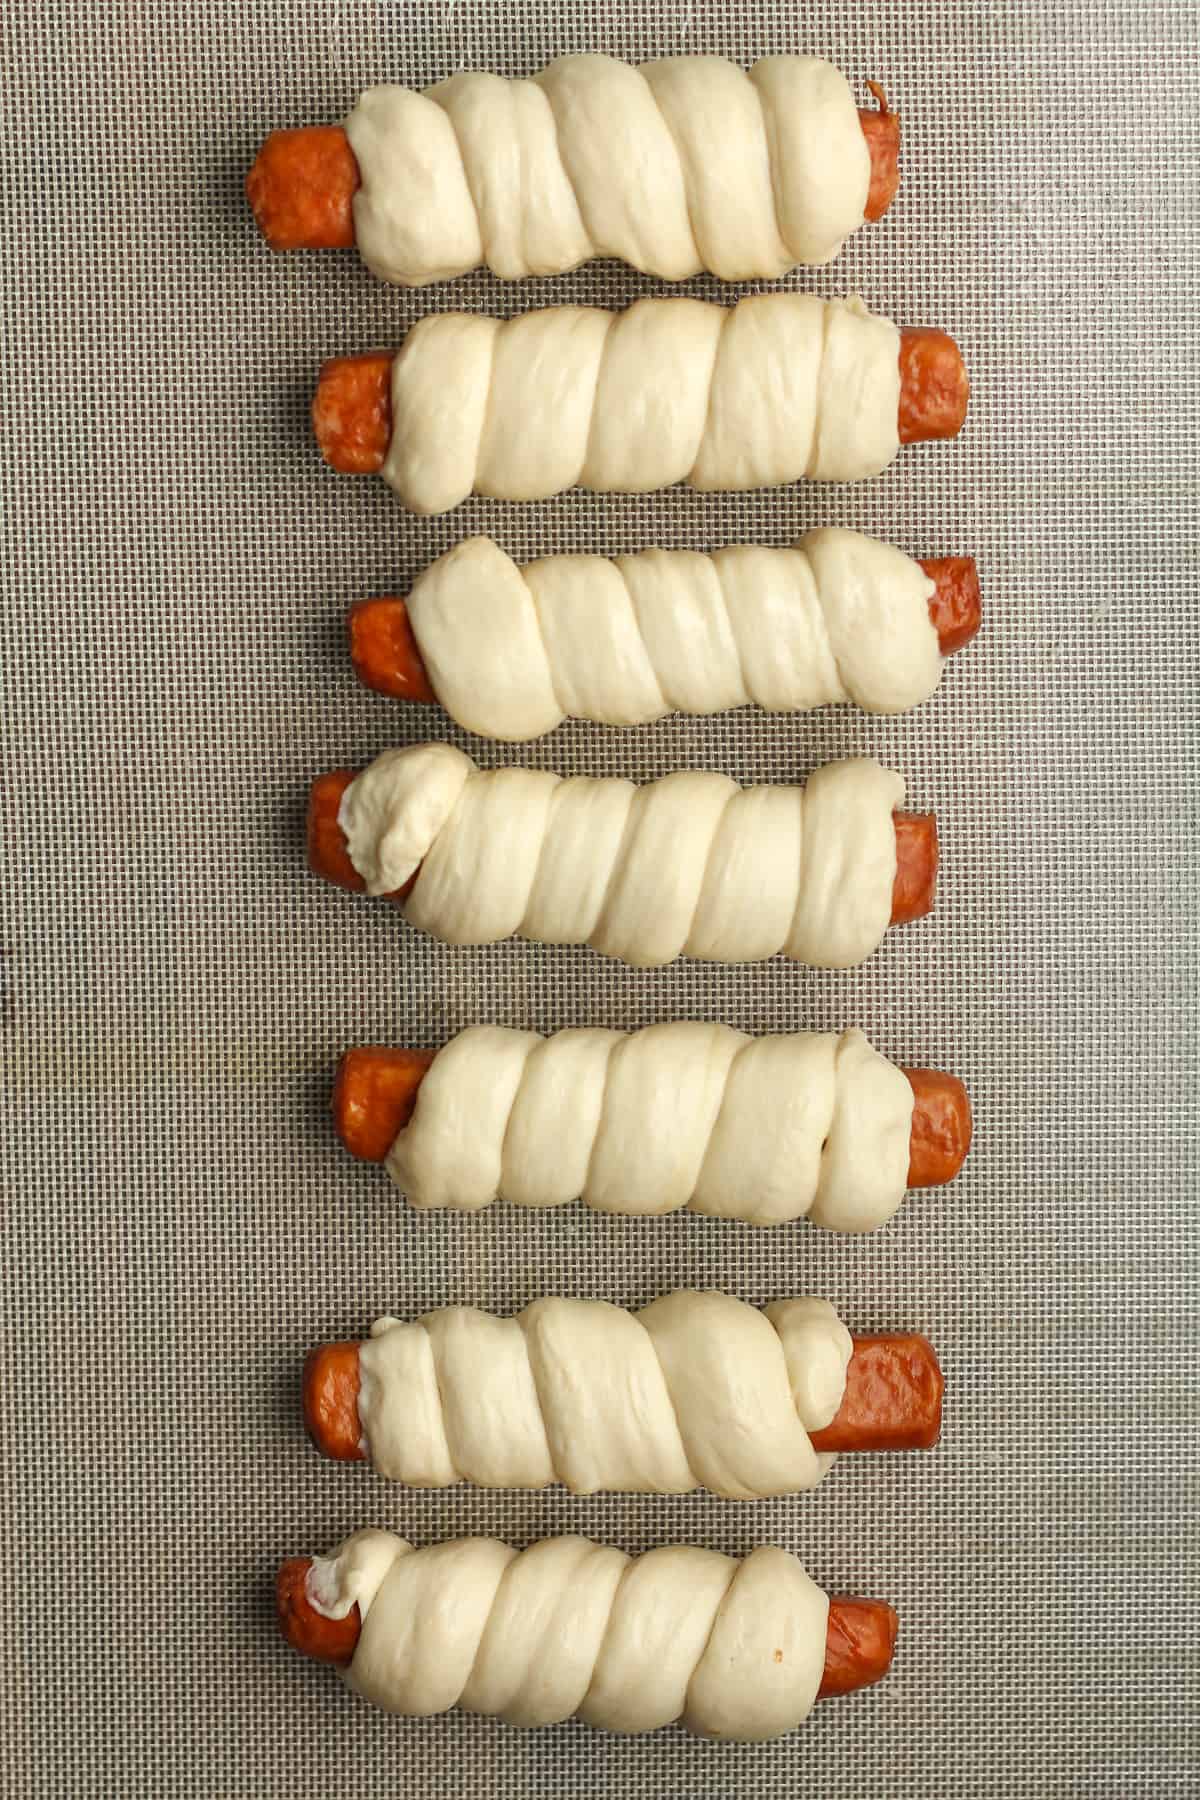 The pretzel dogs after wrapping in the dough, before boiling.